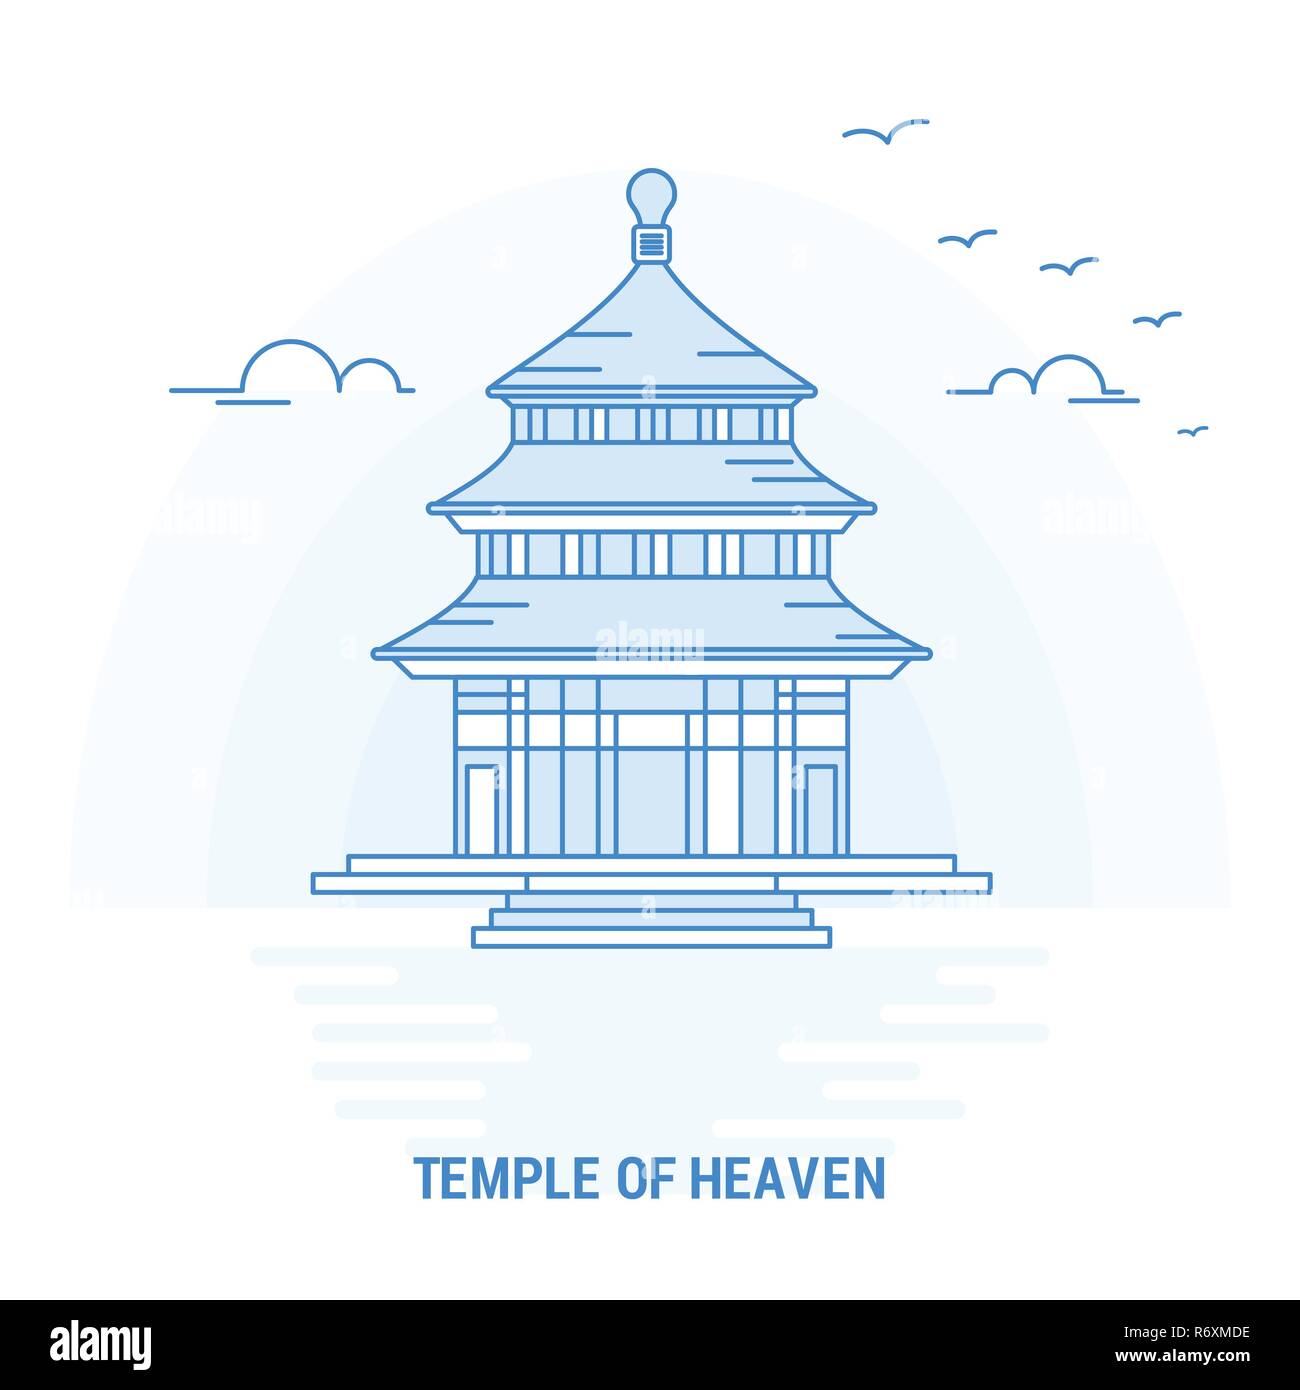 TEMPLE OF HEAVEN Blue Landmark. Creative background and Poster Template Stock Vector